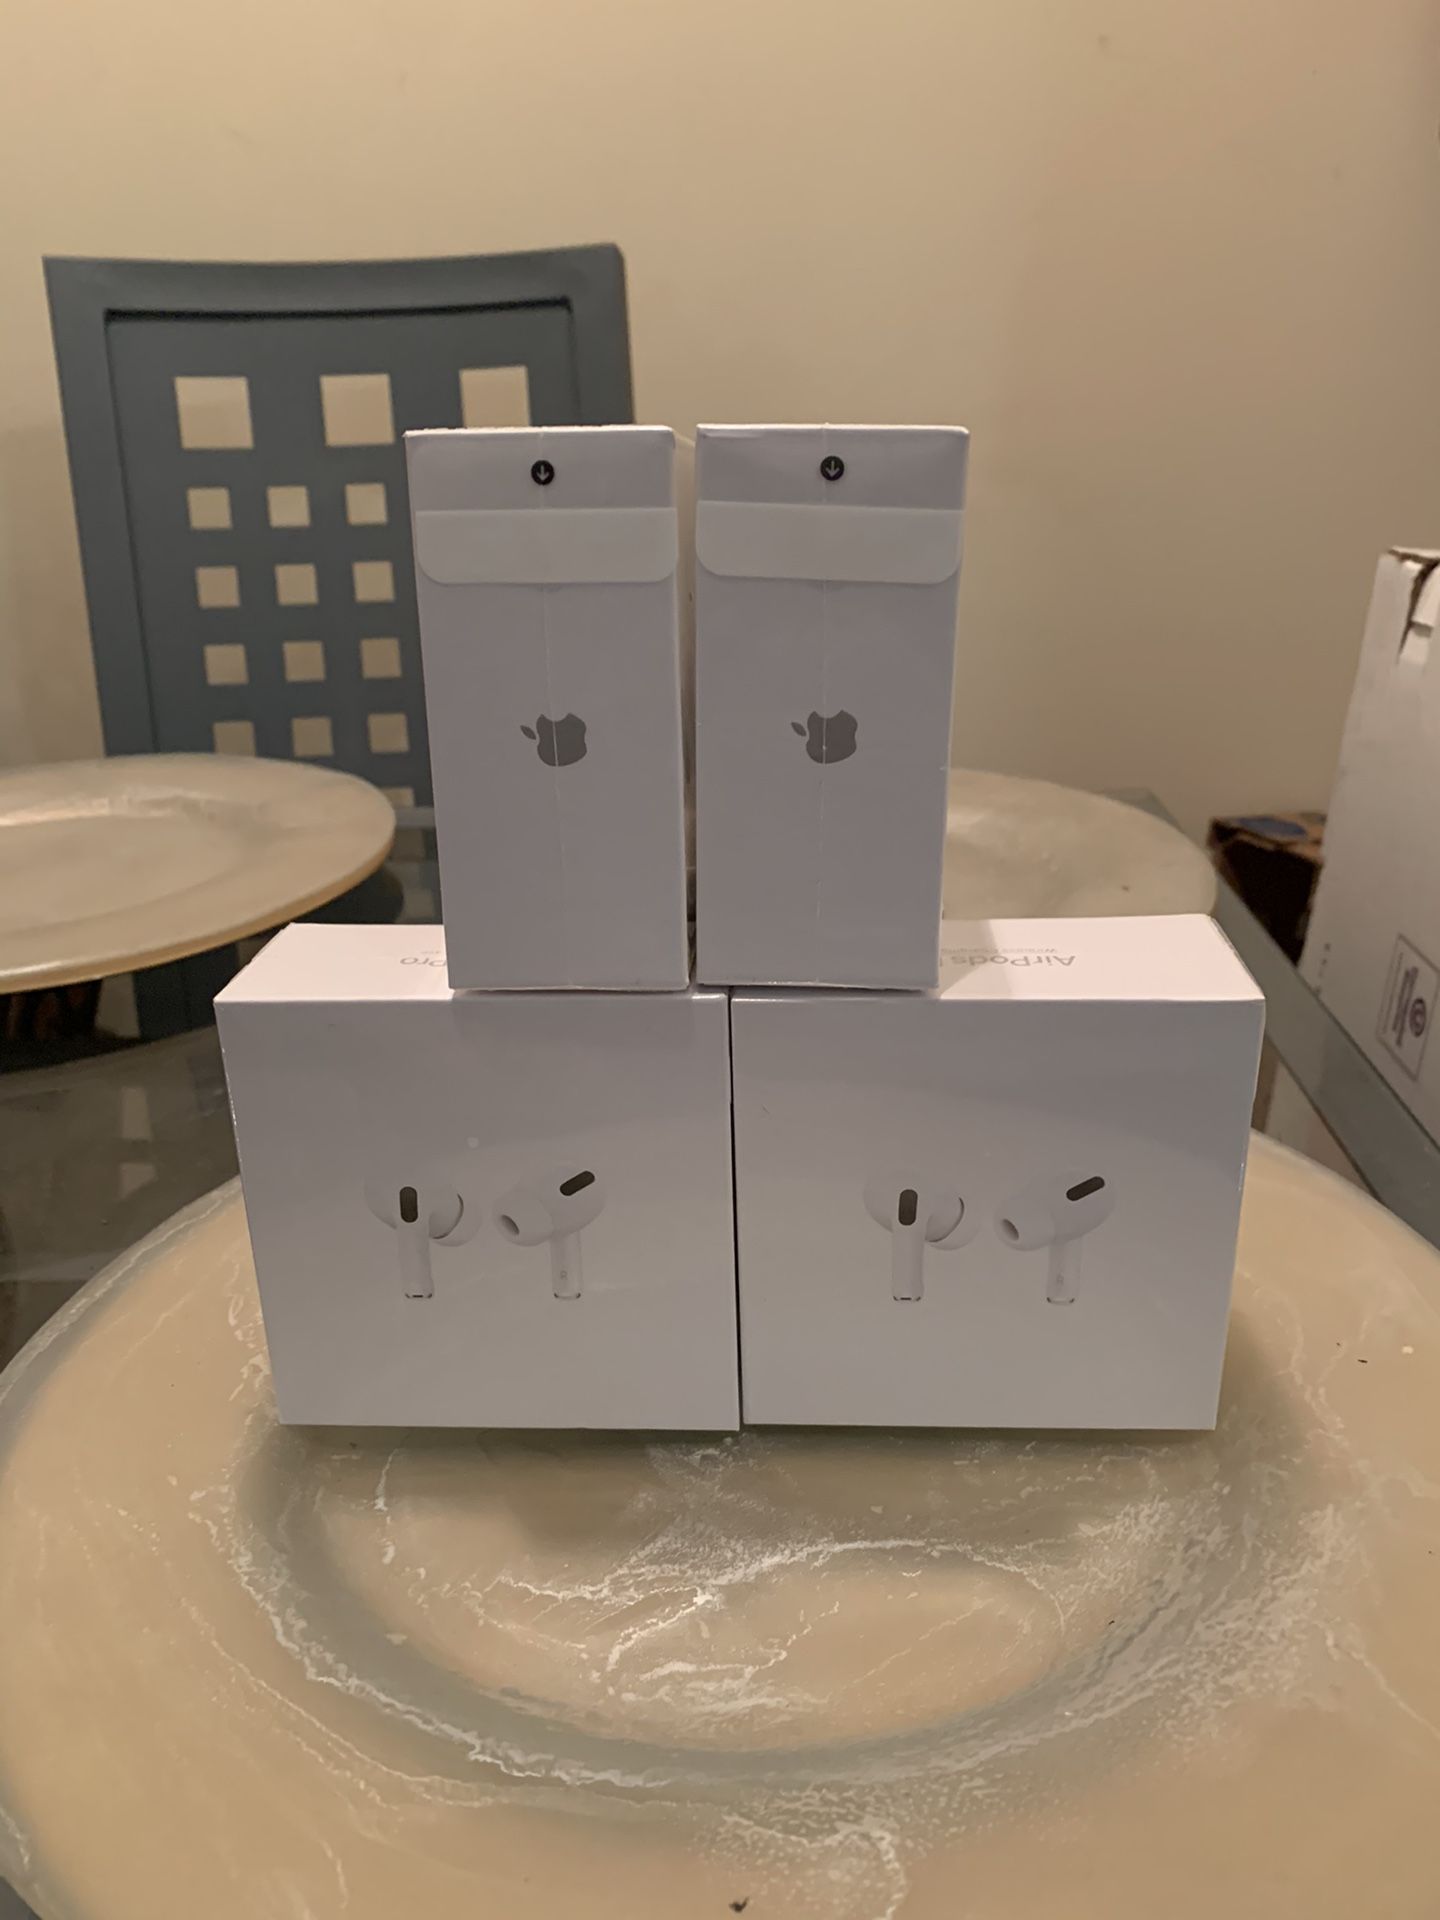 AirPods Pro’s with Wireless Charging Case BRAND NEW